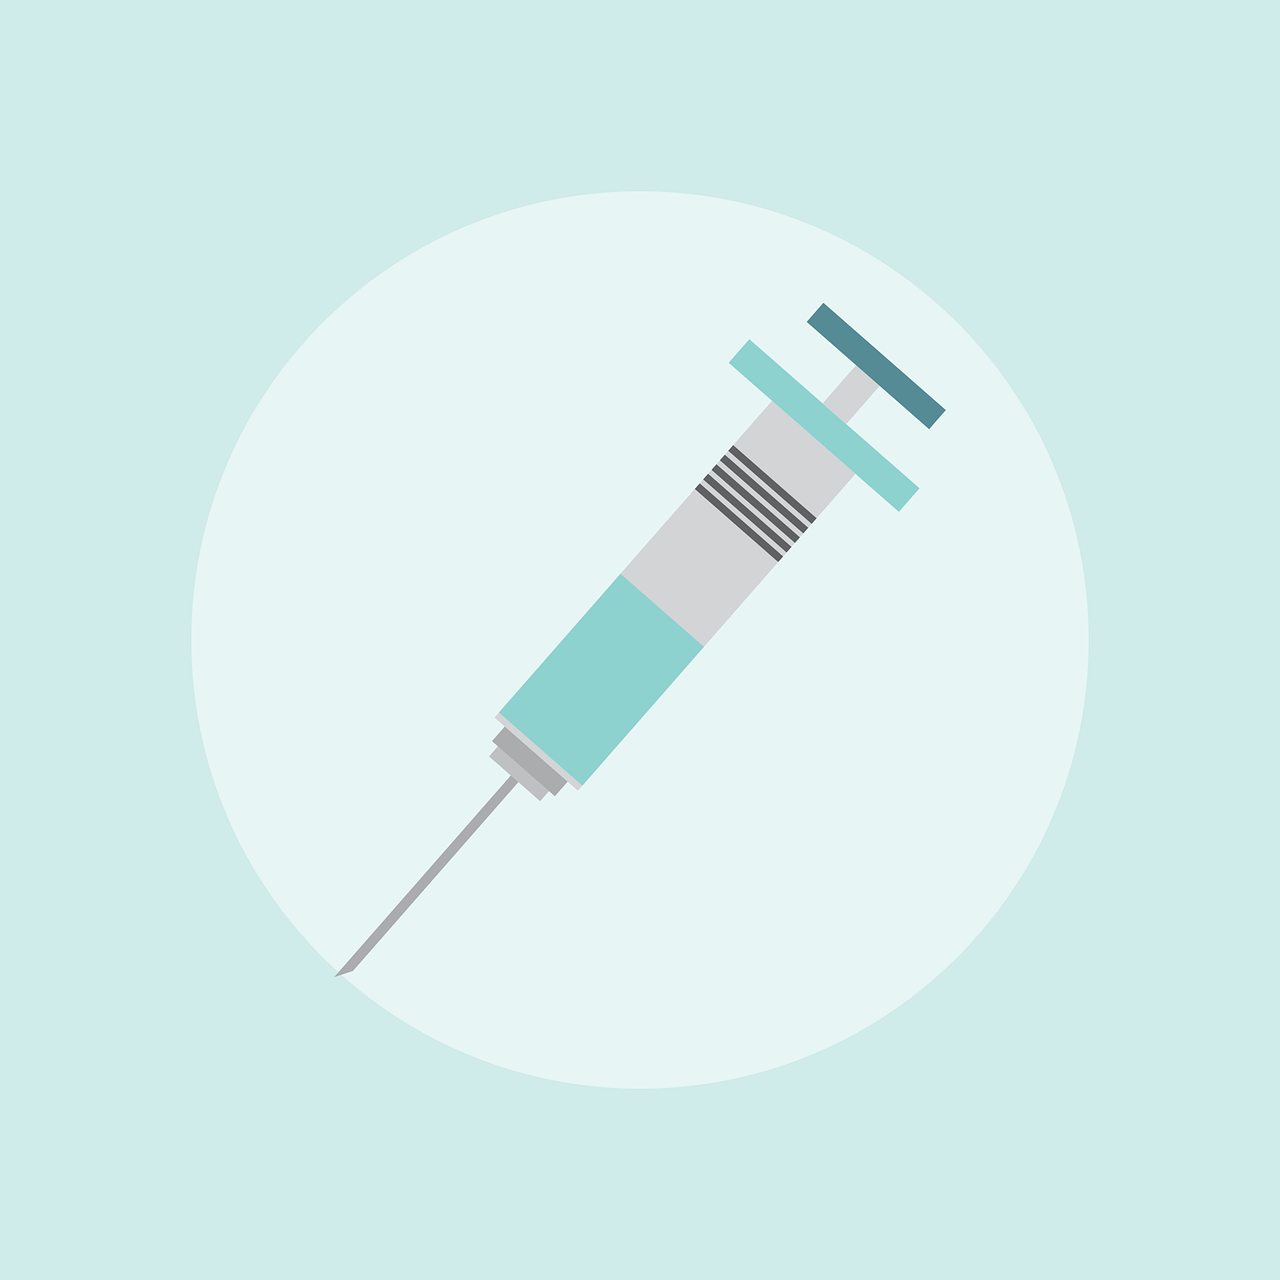 Trending News: High-Dose Influenza Vaccine More Effective for Hospitalization Prevention